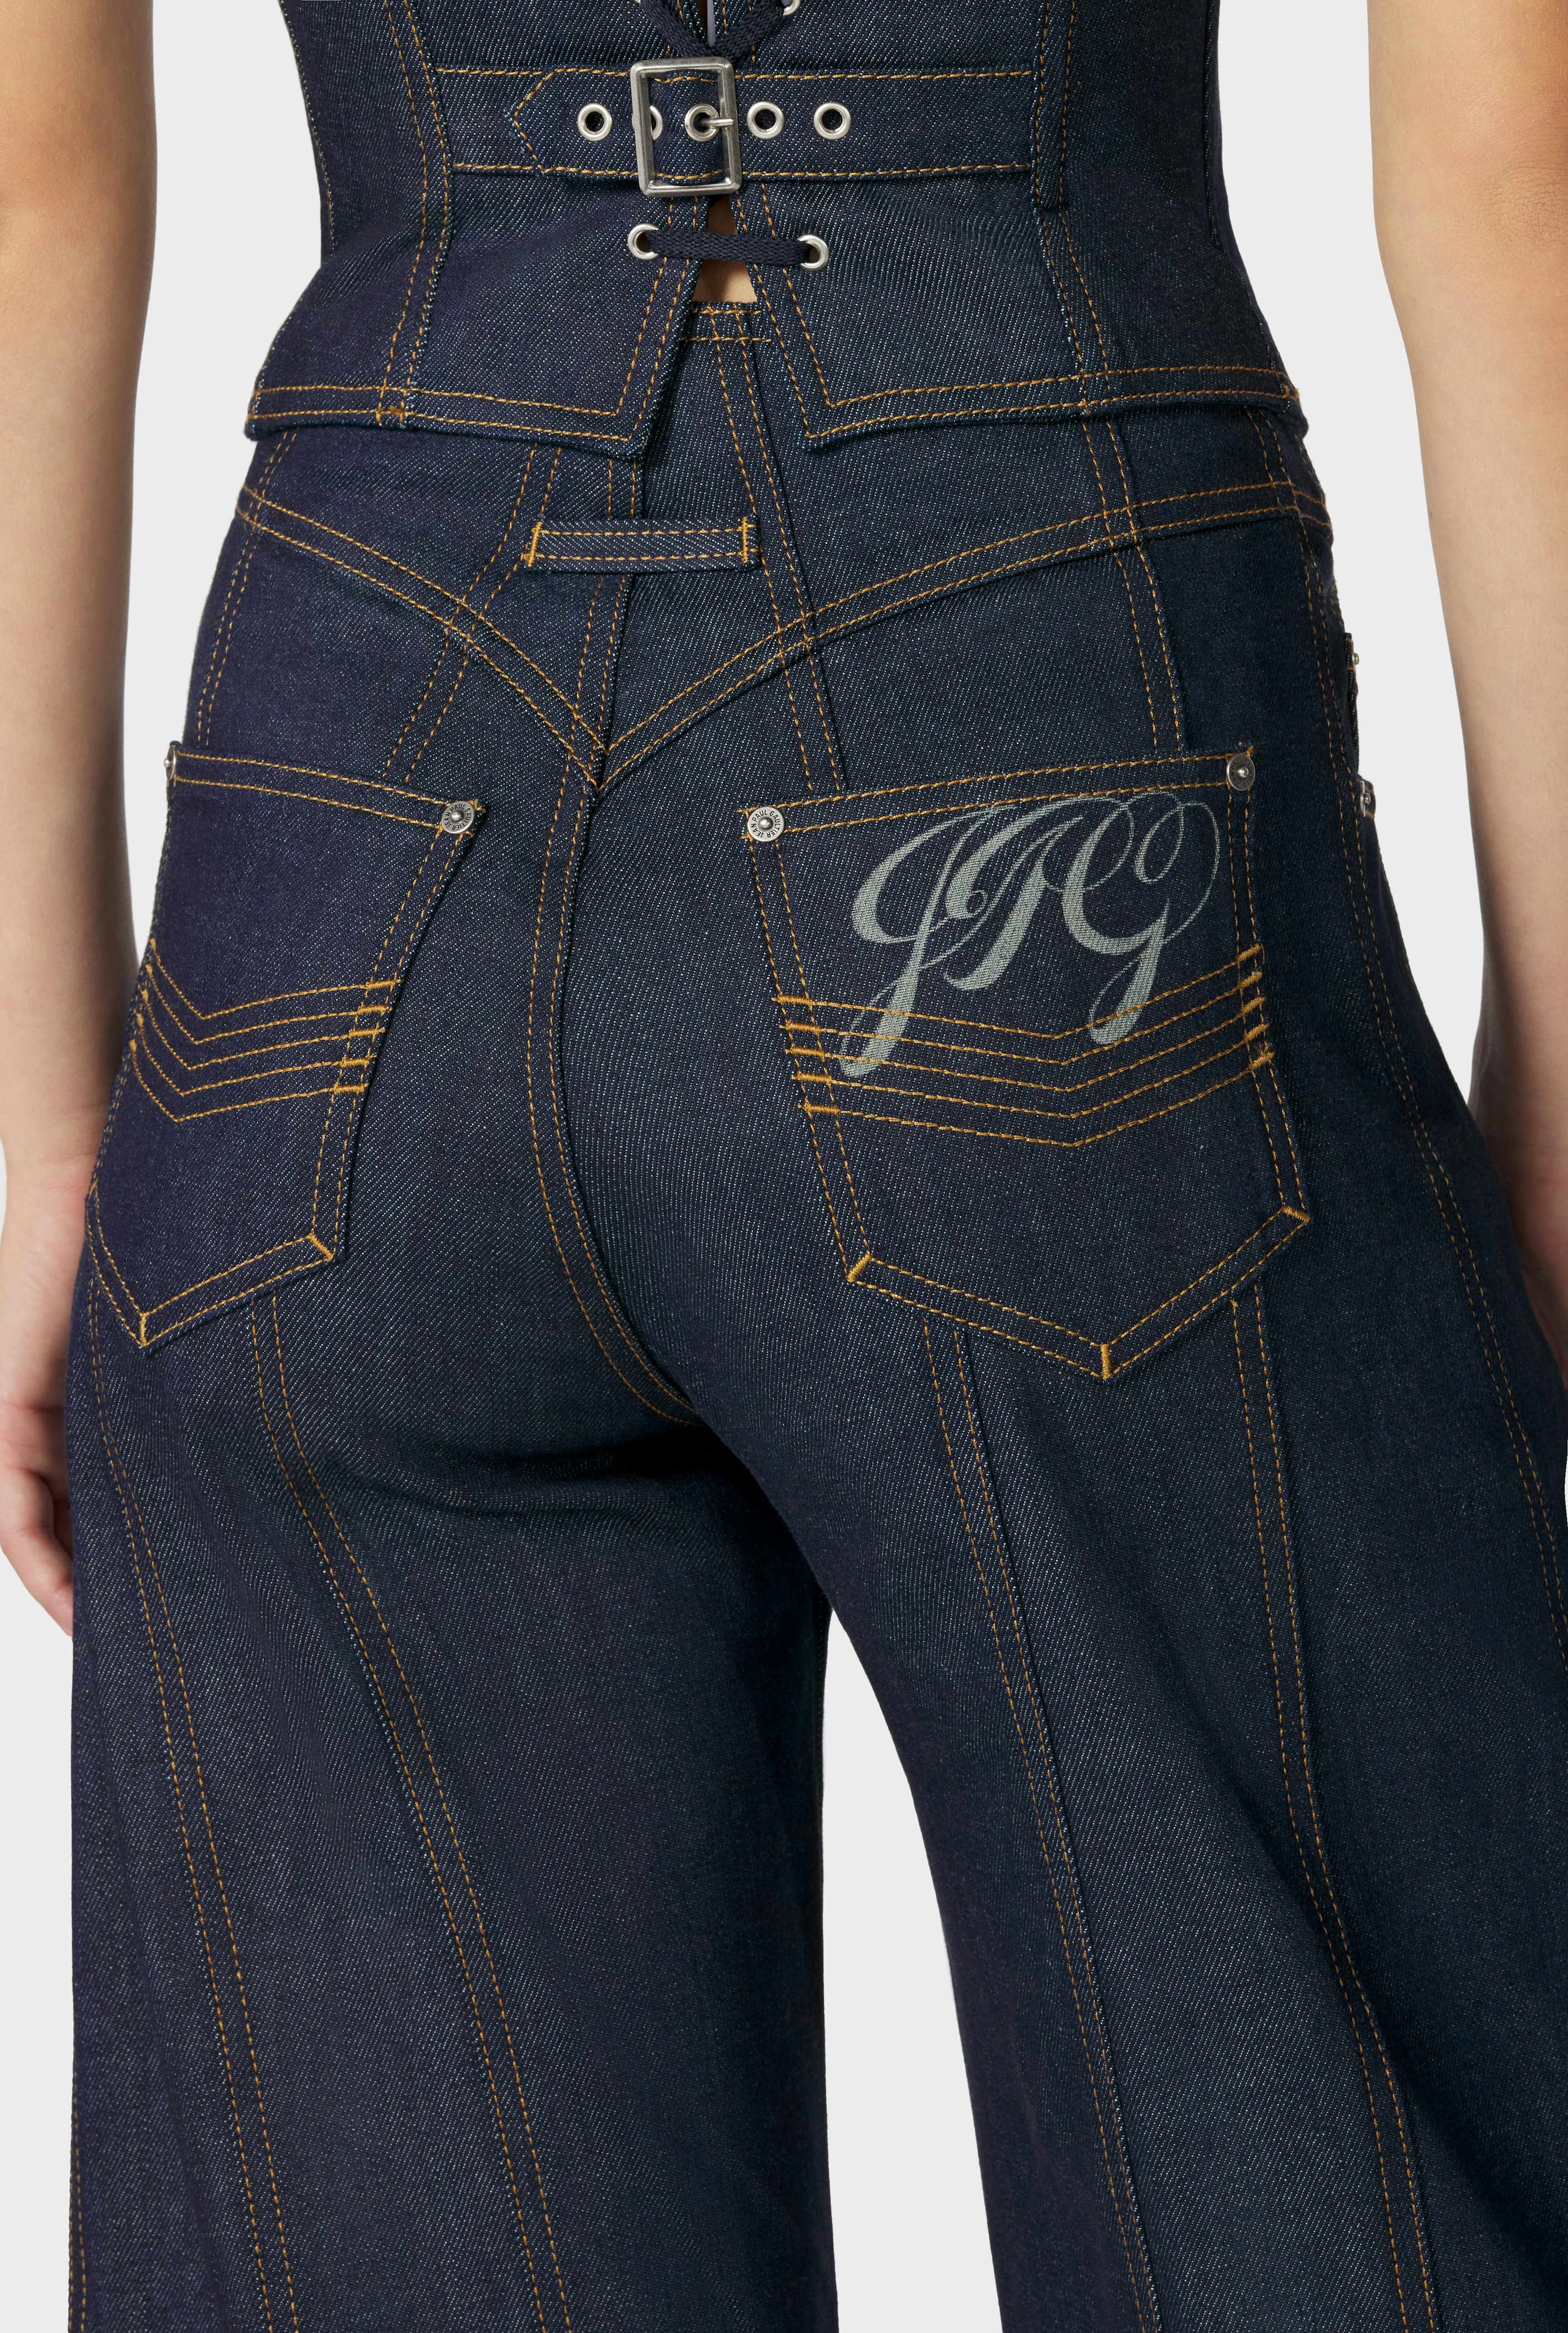 The JPG Raw Jeans